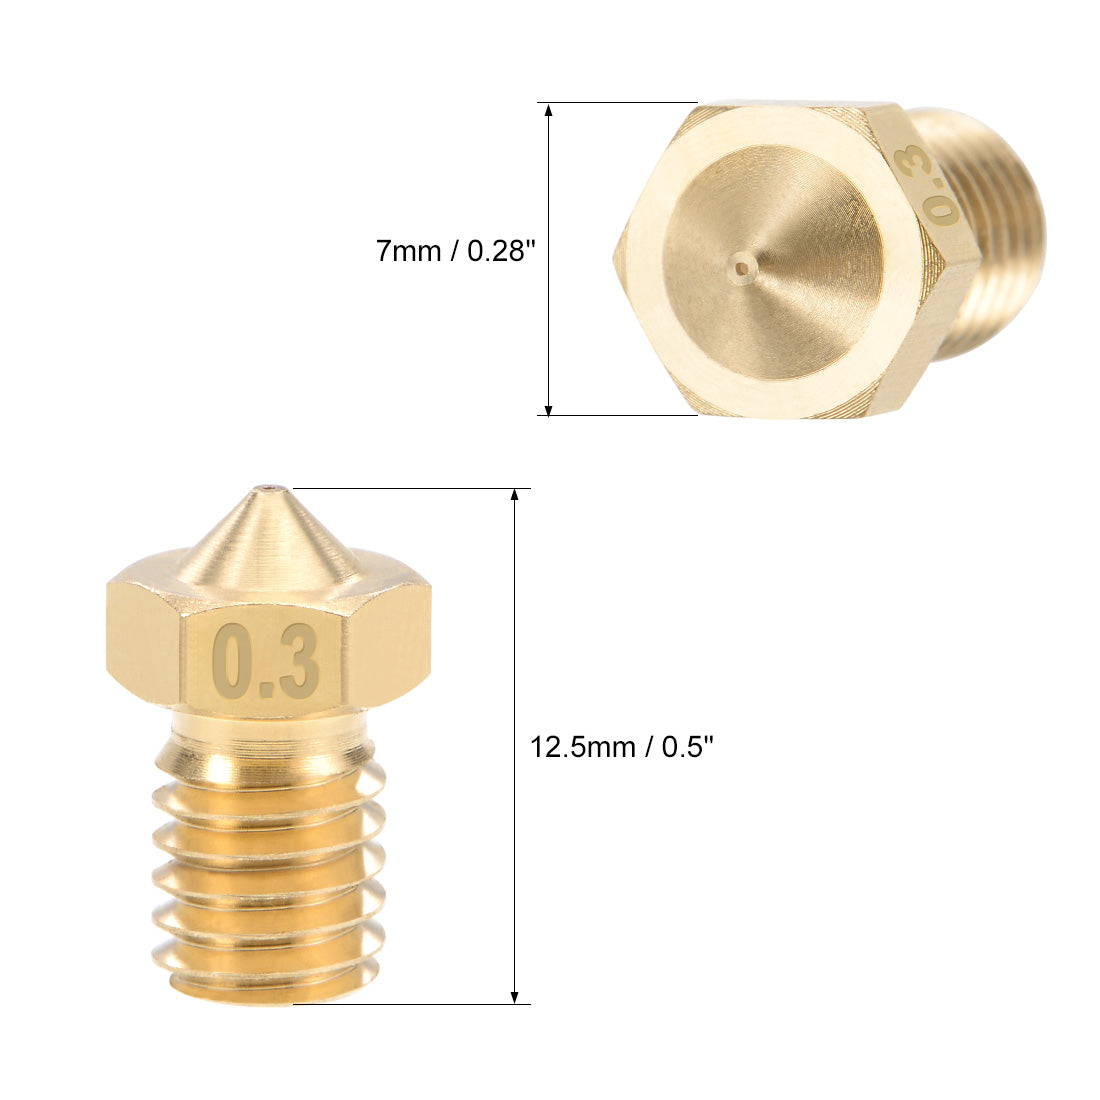 uxcell Uxcell 0.3mm 3D Printer Nozzle Head M6 for V5 V6 2mm Extruder Print, Brass 5pcs